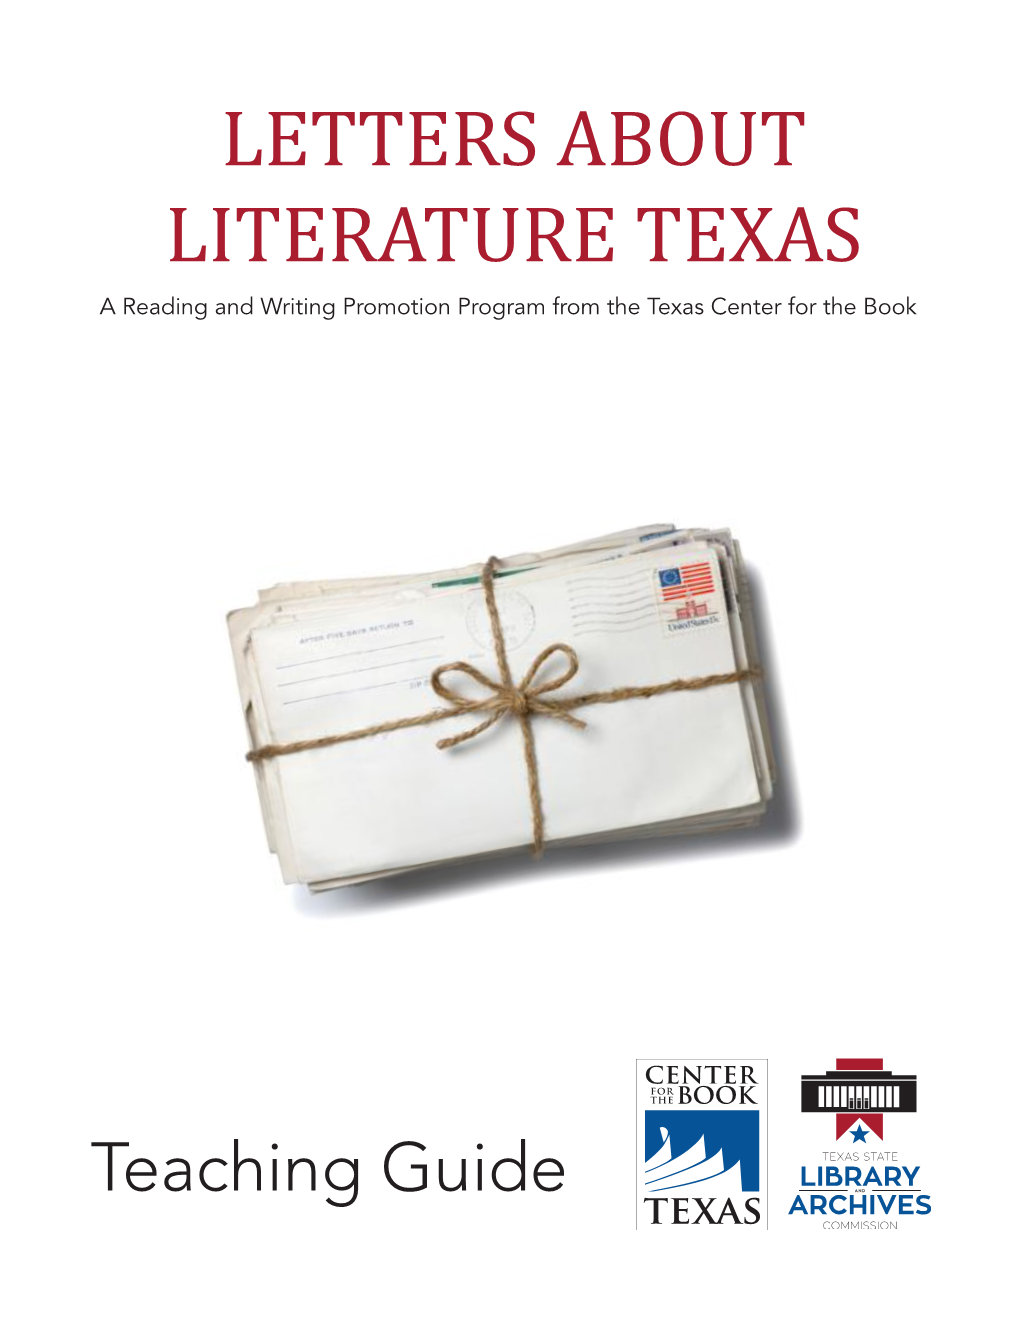 Teacher Guide to Letters About Literature